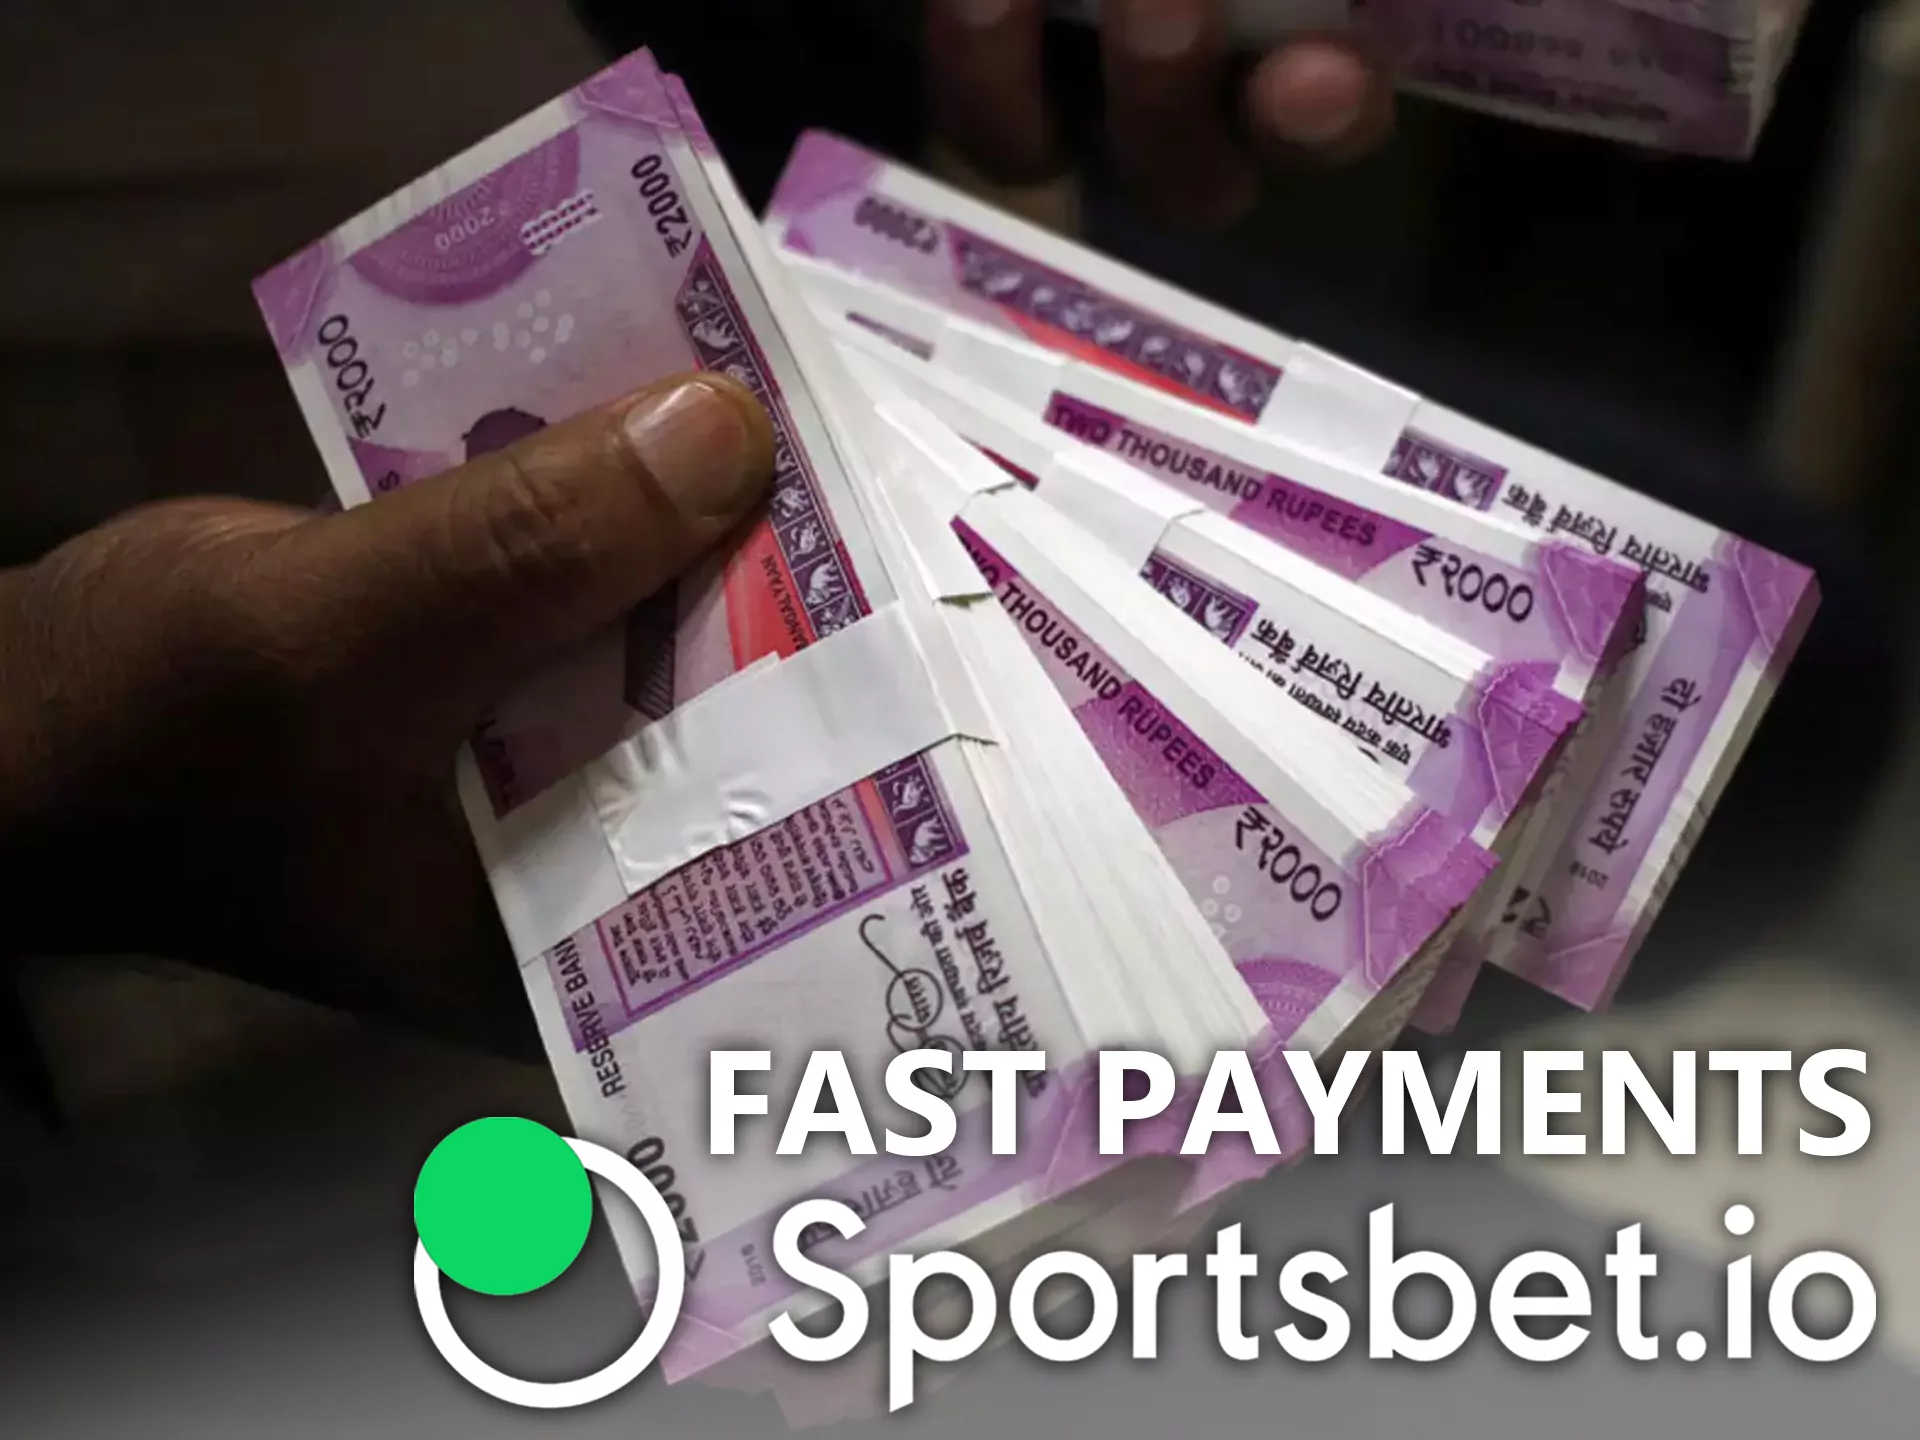 You can easily make deposits and withdrawals at Sportsbet.